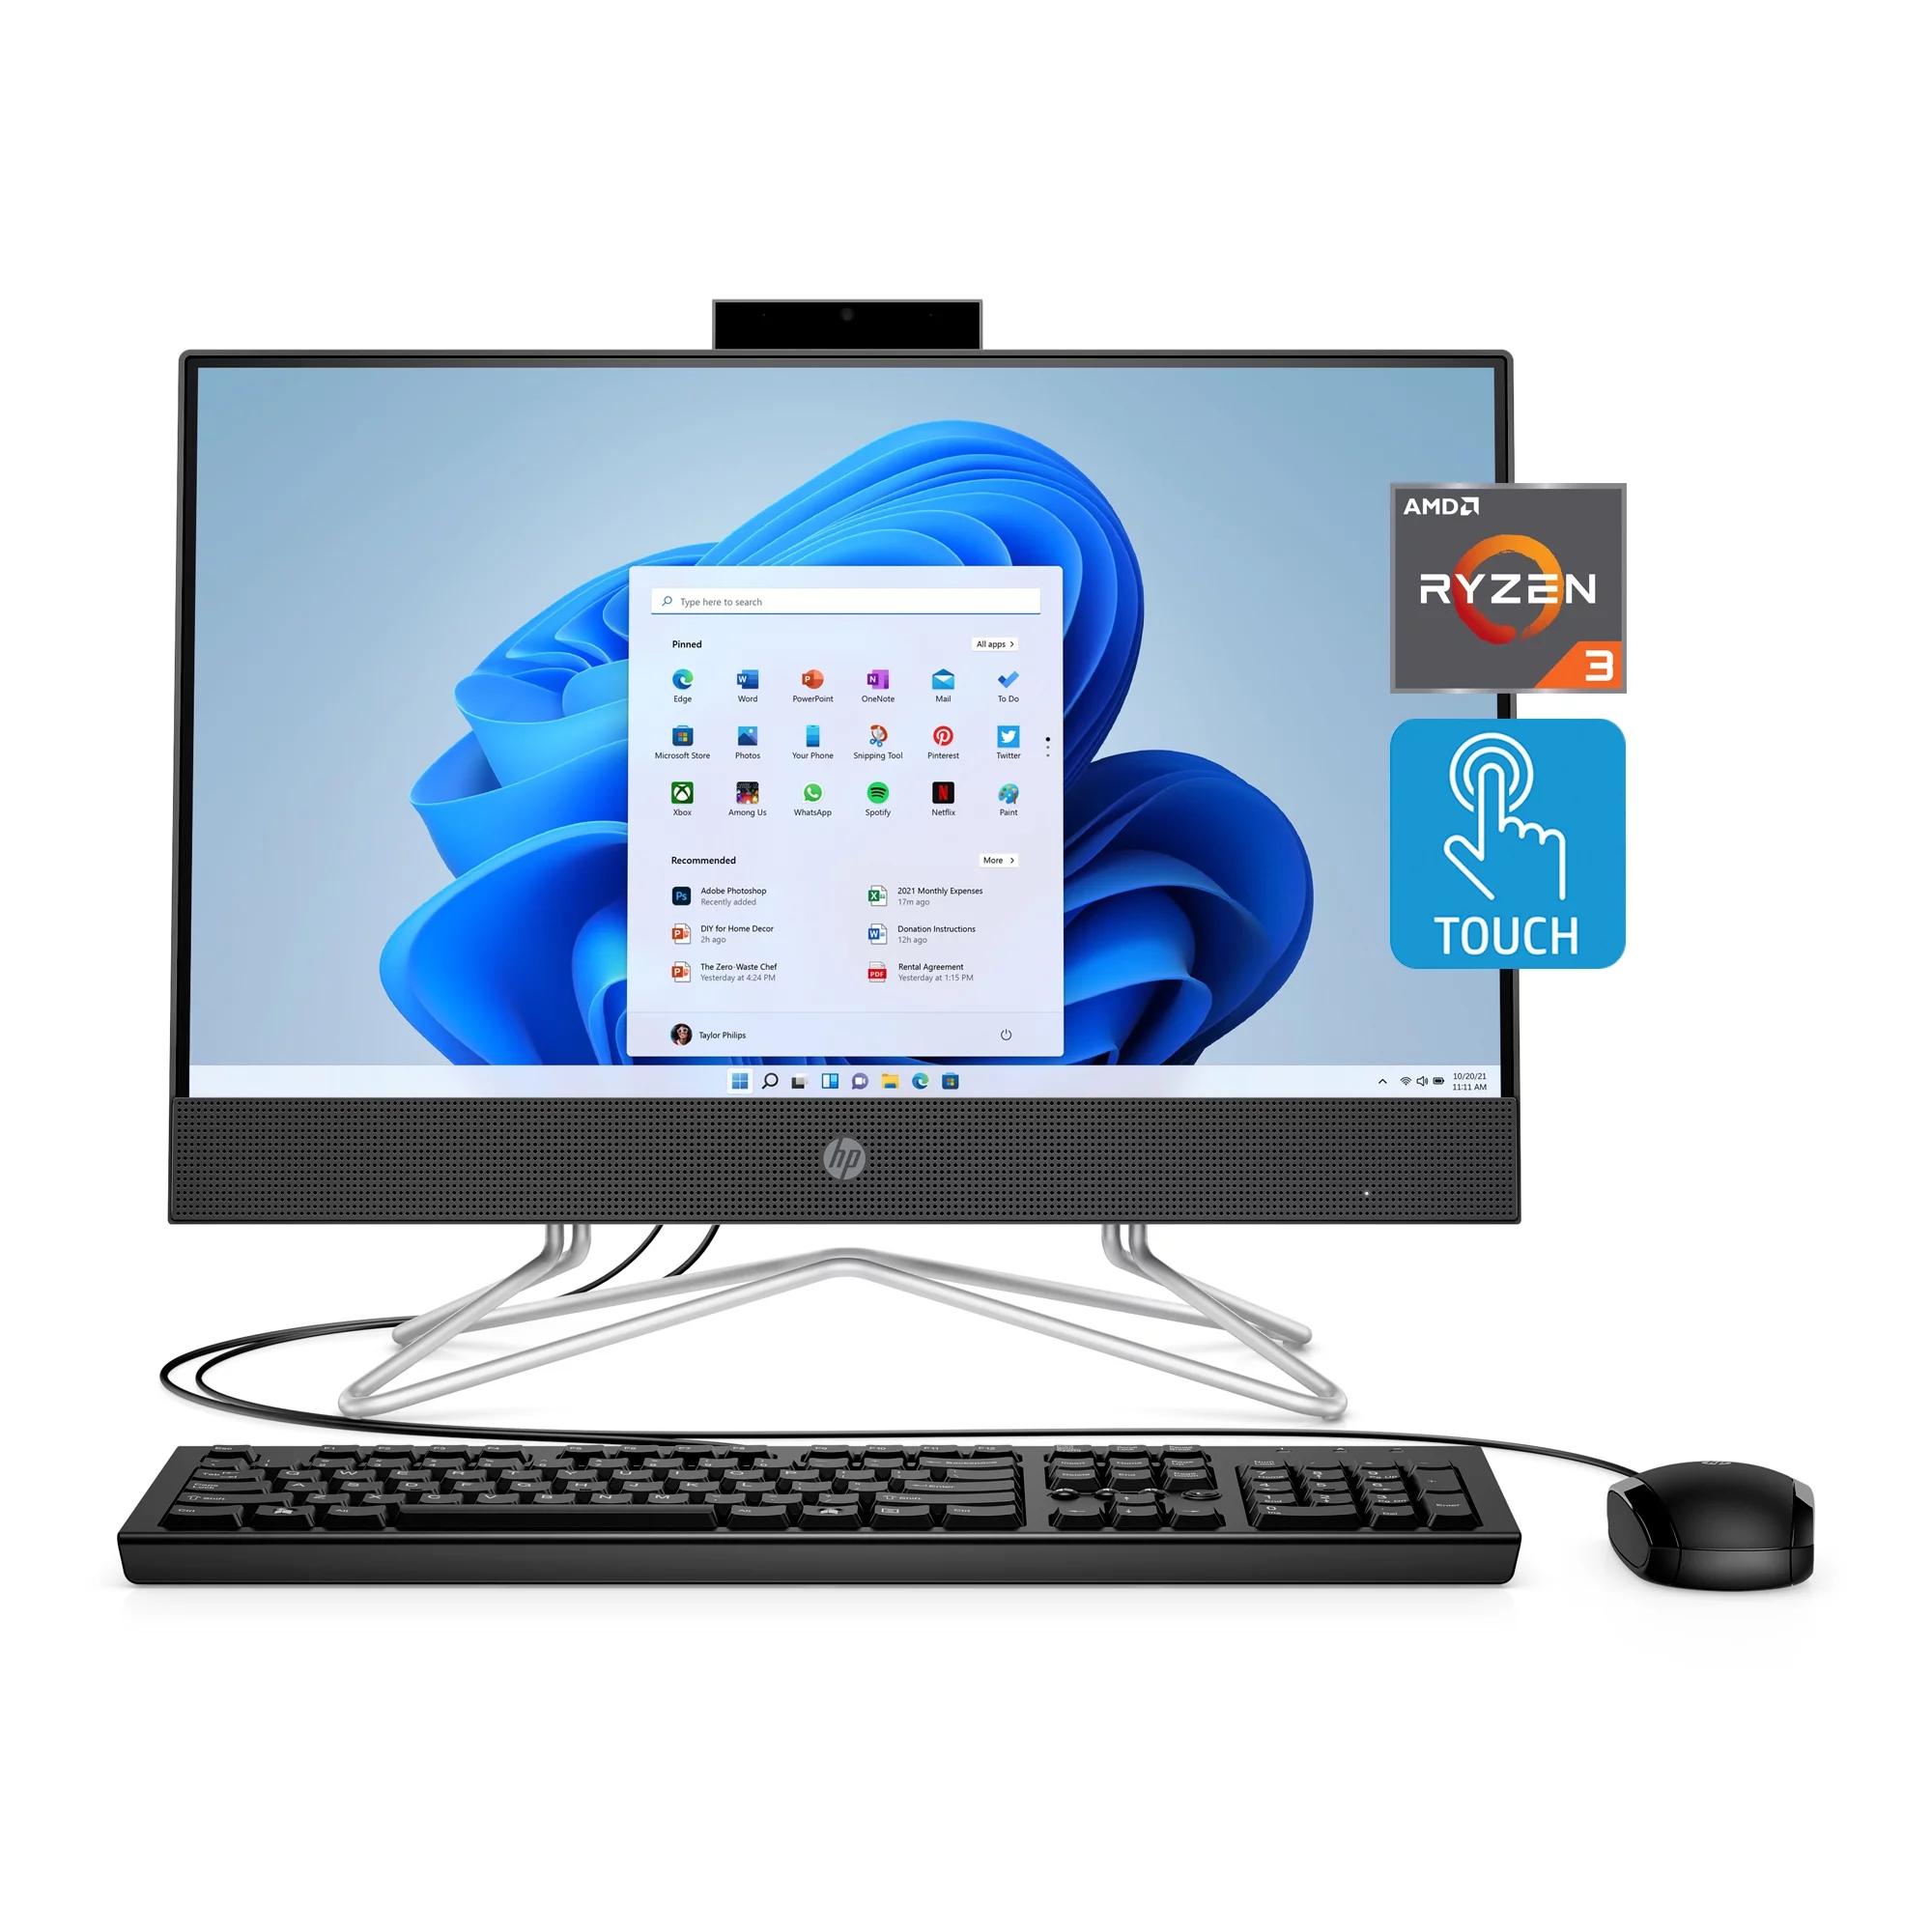 Hp 22 all-in-one: performance and functionality combined